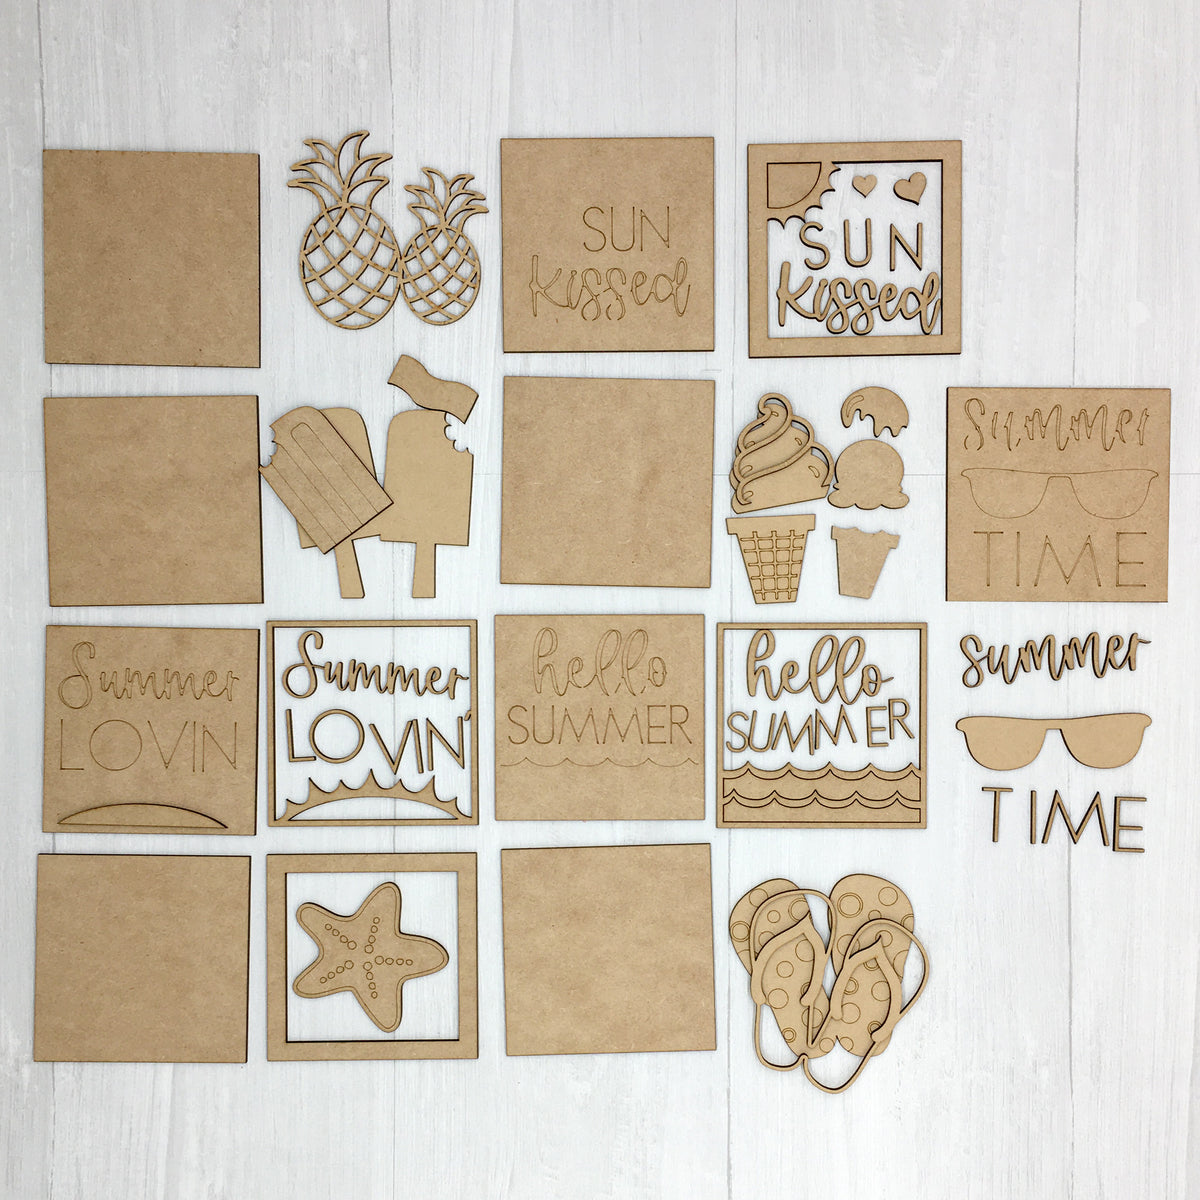 DIY Wooden Interchangeable Mini Signs - Tons of Options!